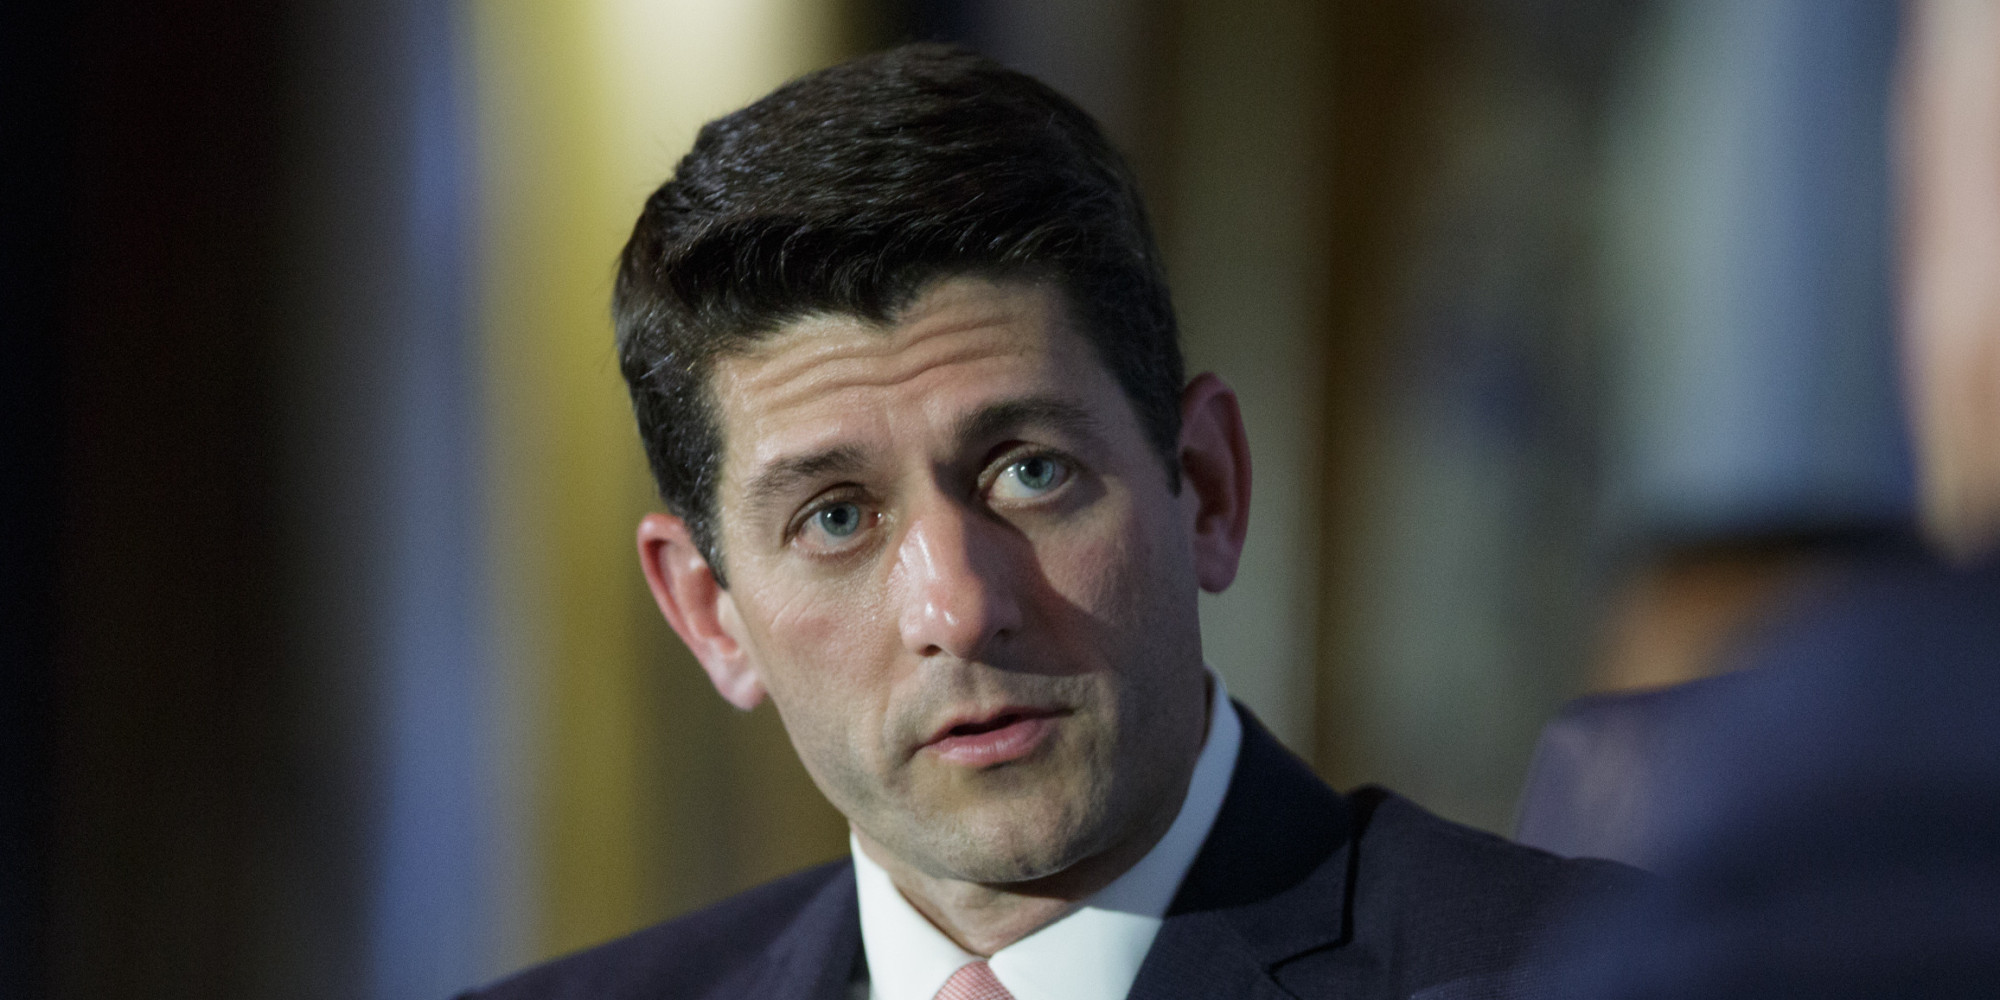 Paul Ryan Reacts To John Olivers Ayn Rand Takedown Says He Disagrees With Her Philosophy